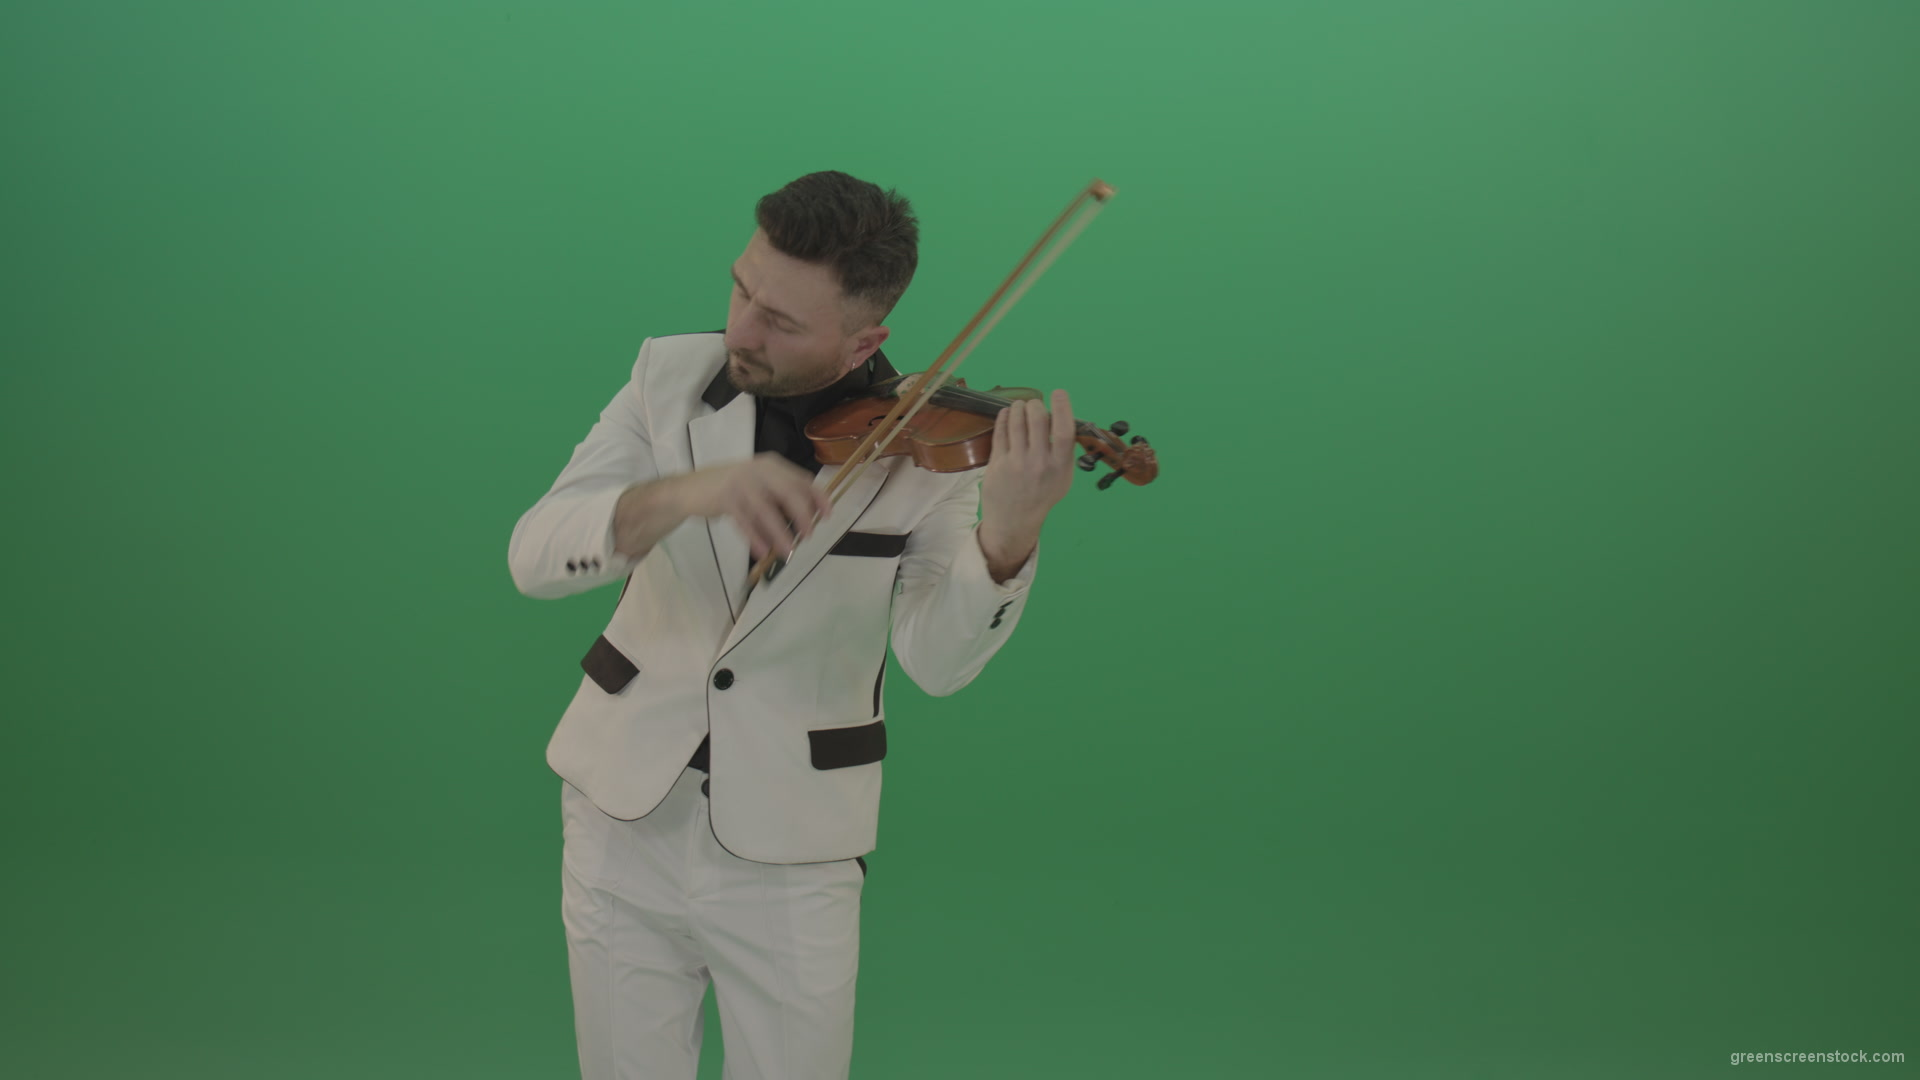 Man-is-playing-slow-love-in-white-costume-on-violin-Fiddle-string-music-instrument-isolated-on-green-screen_008 Green Screen Stock